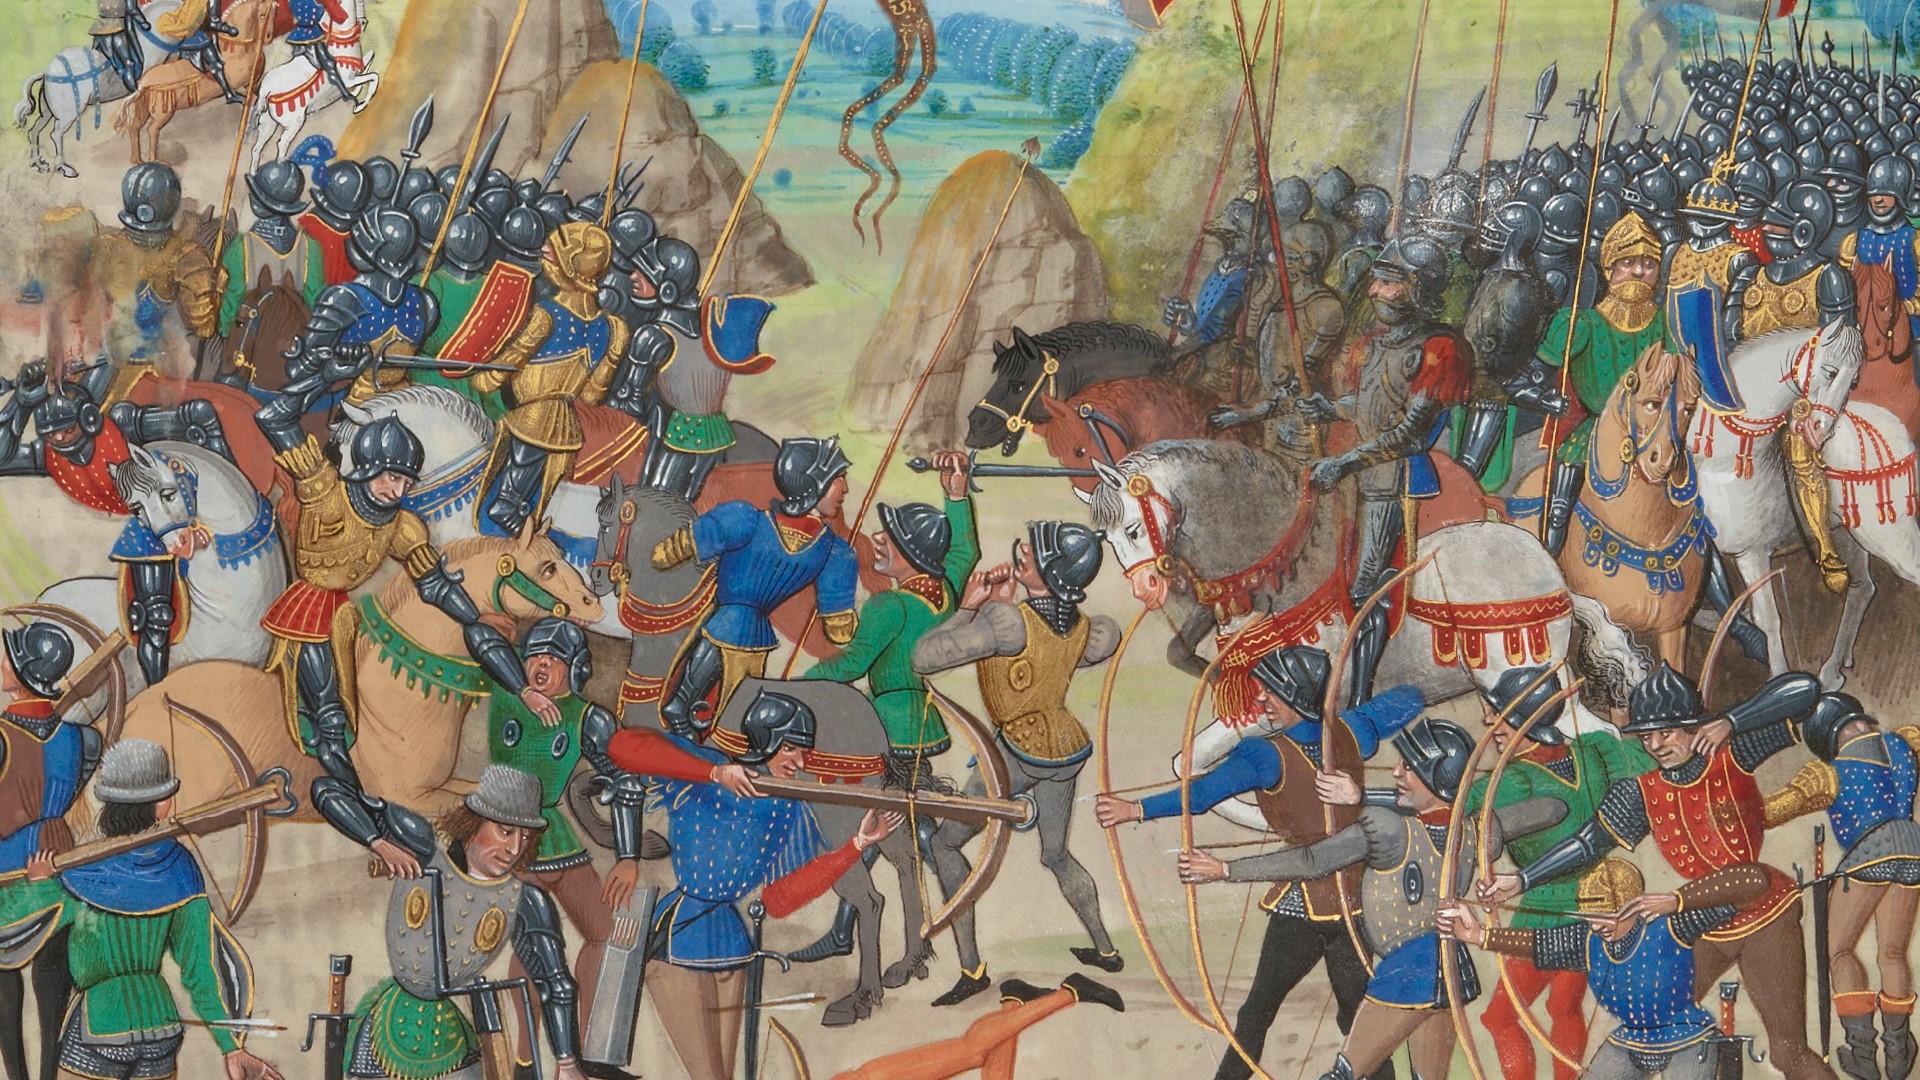 Battle of Crécy between the English and French in the Hundred Years' War